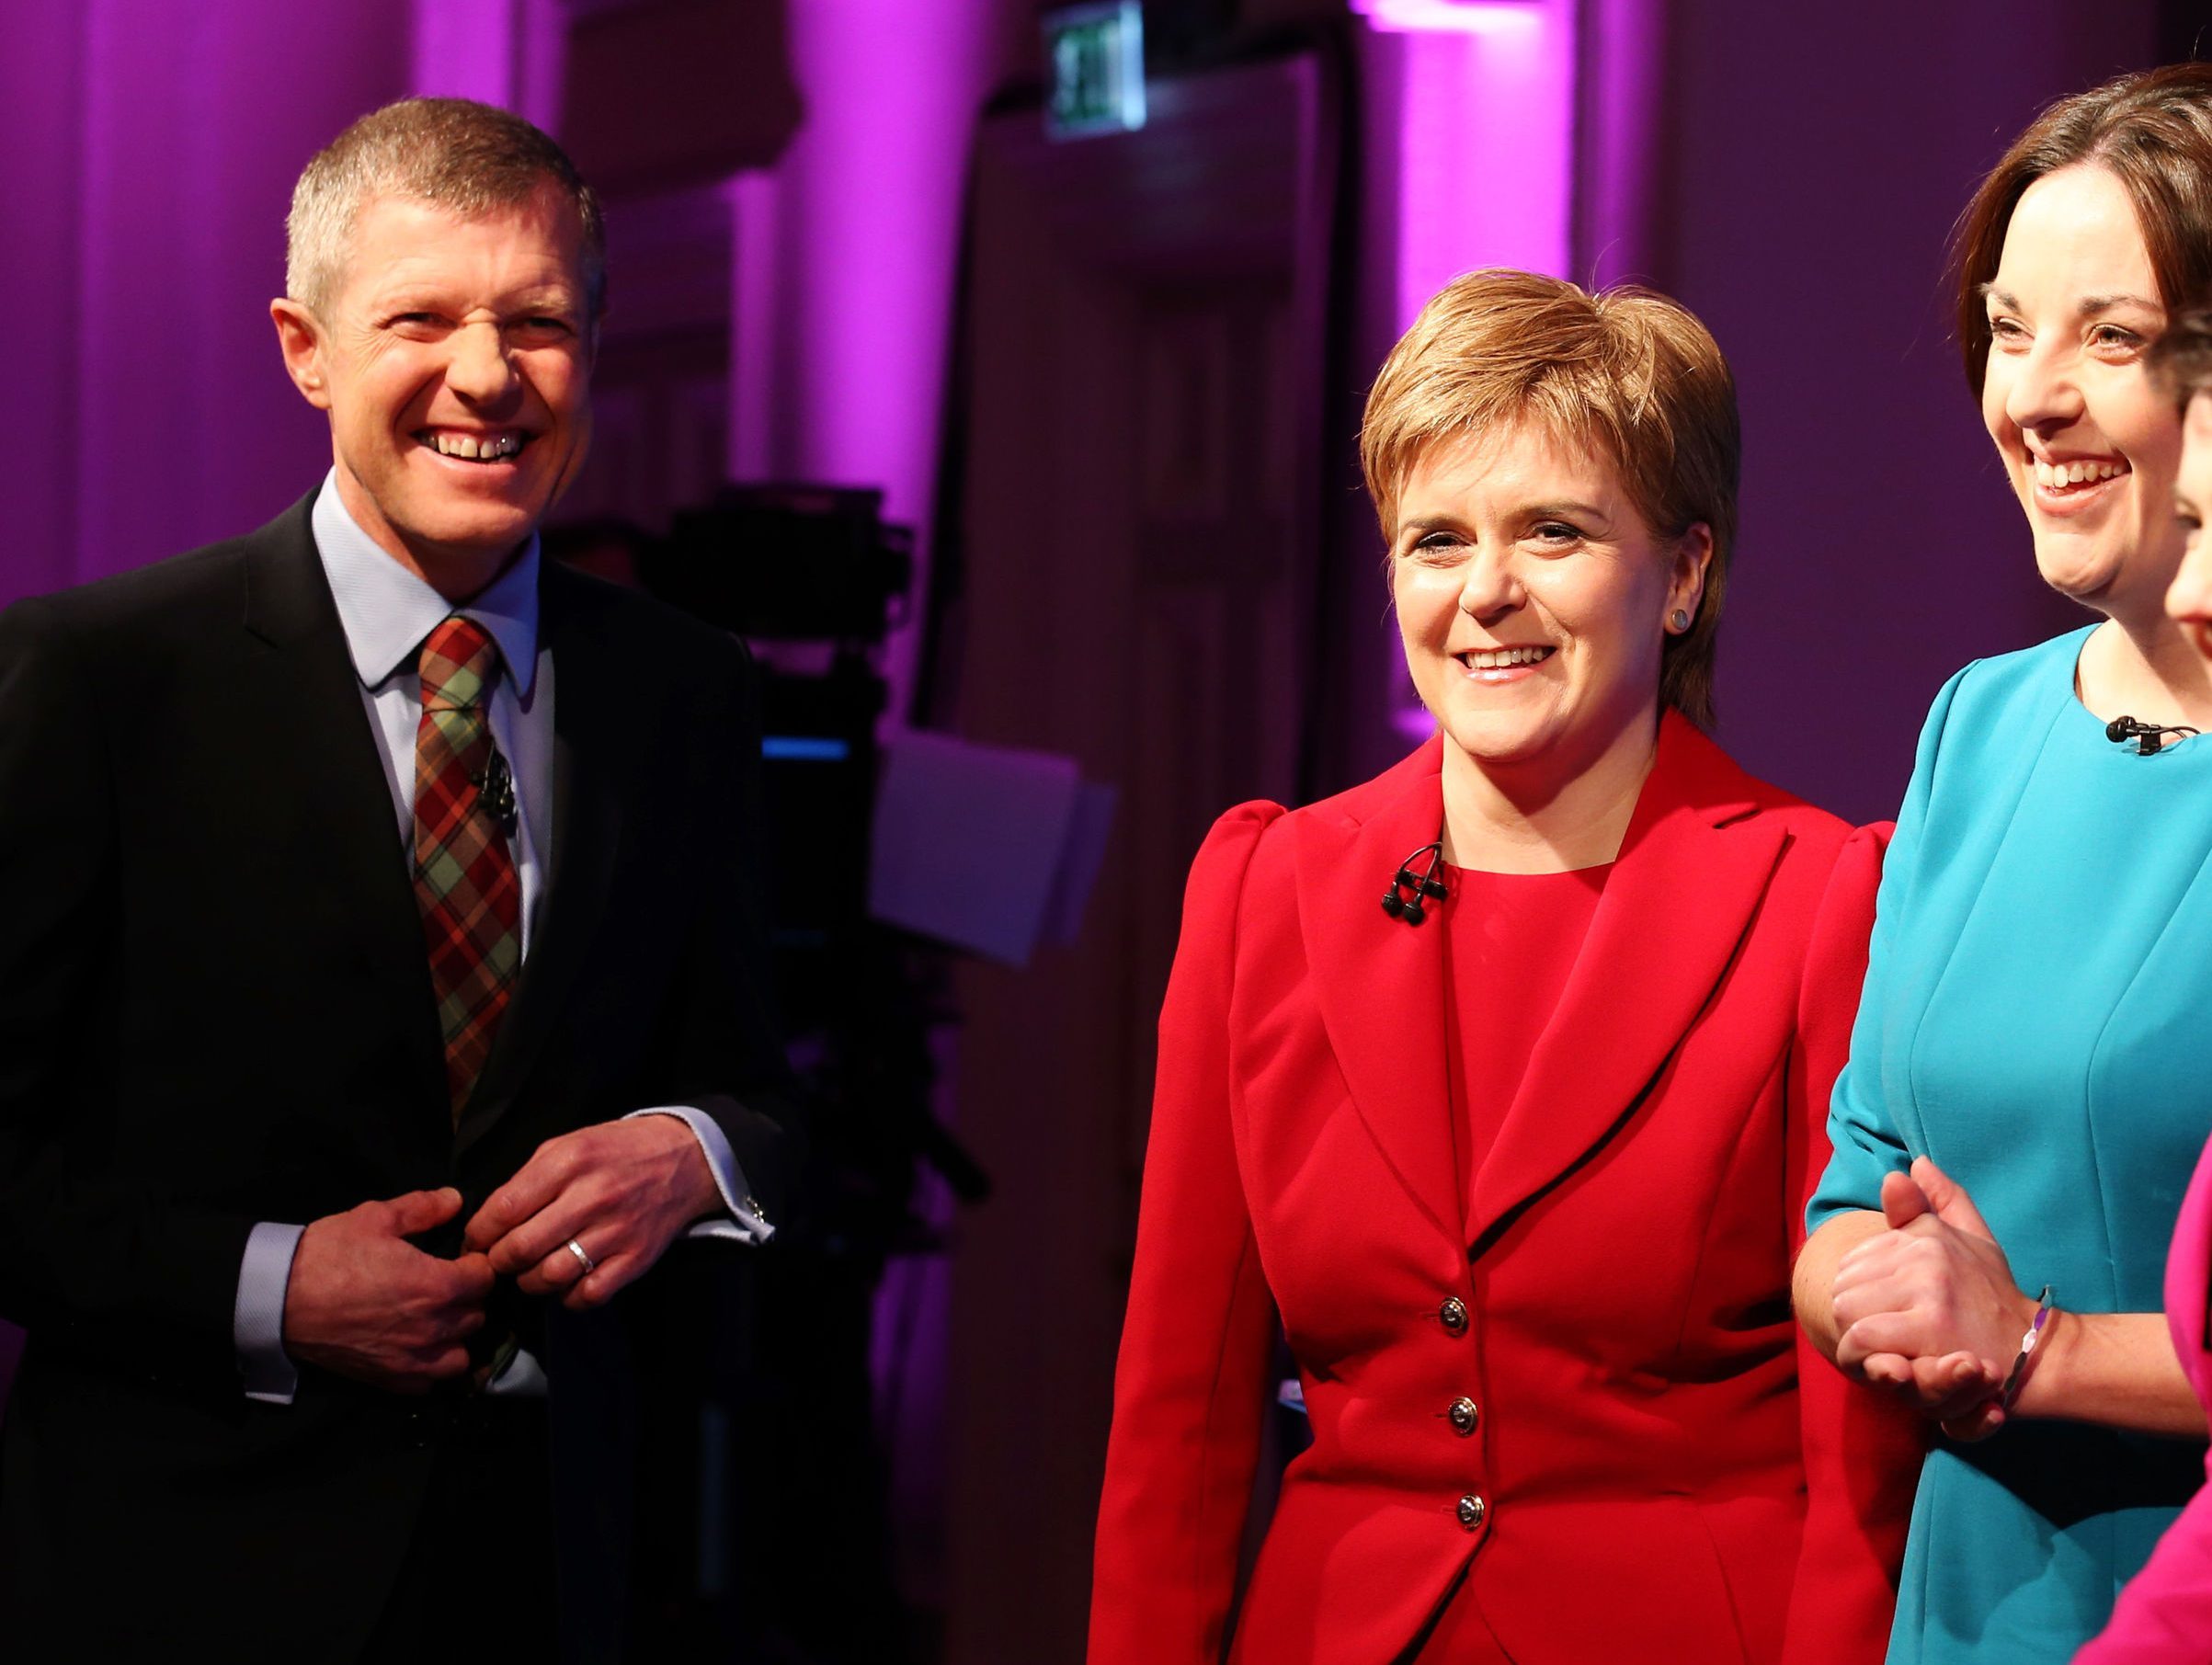 (Left to right) Scottish Liberal Democrat leader Willie Rennie, First Minister and leader of the Scottish National Party Nicola Sturgeon, Scottish Labour Party leader Kezia Dugdale (Andrew Milligan/PA Wire)